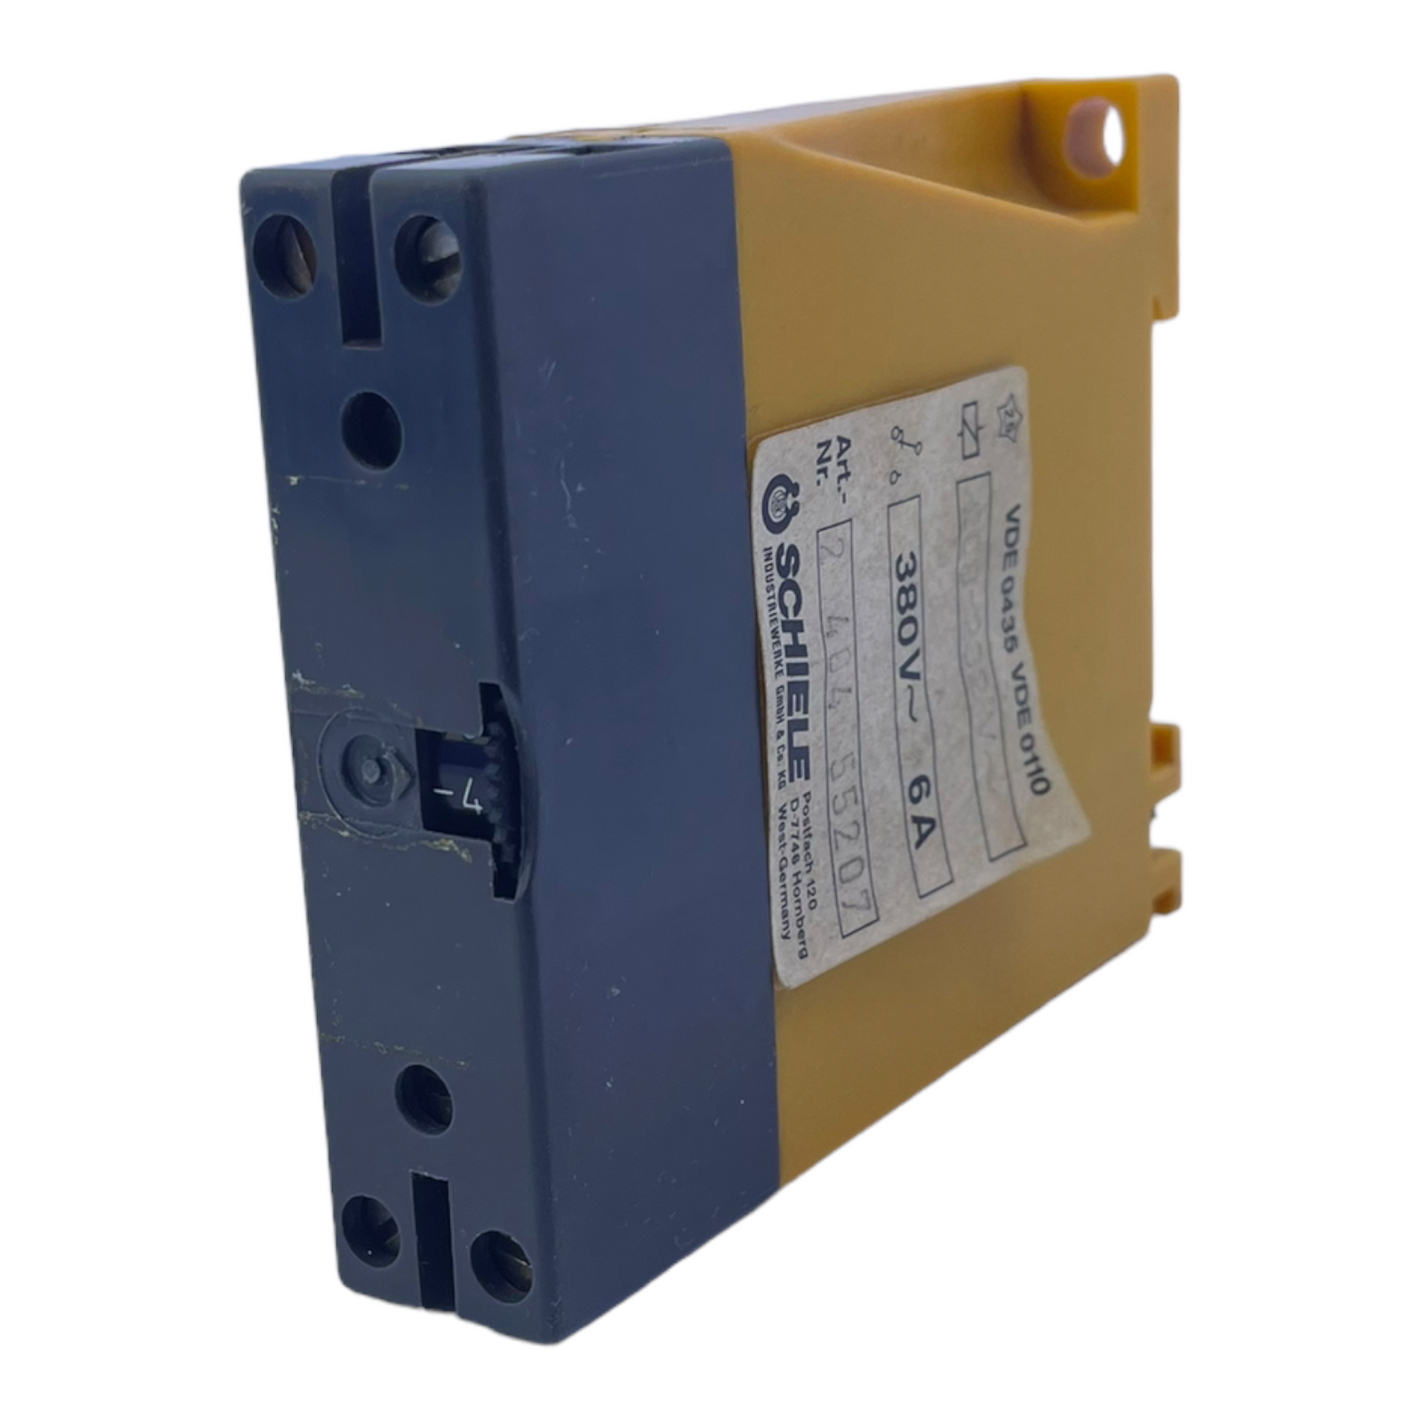 Schiele 240455207 circuit breaker for industrial use 380V 6A